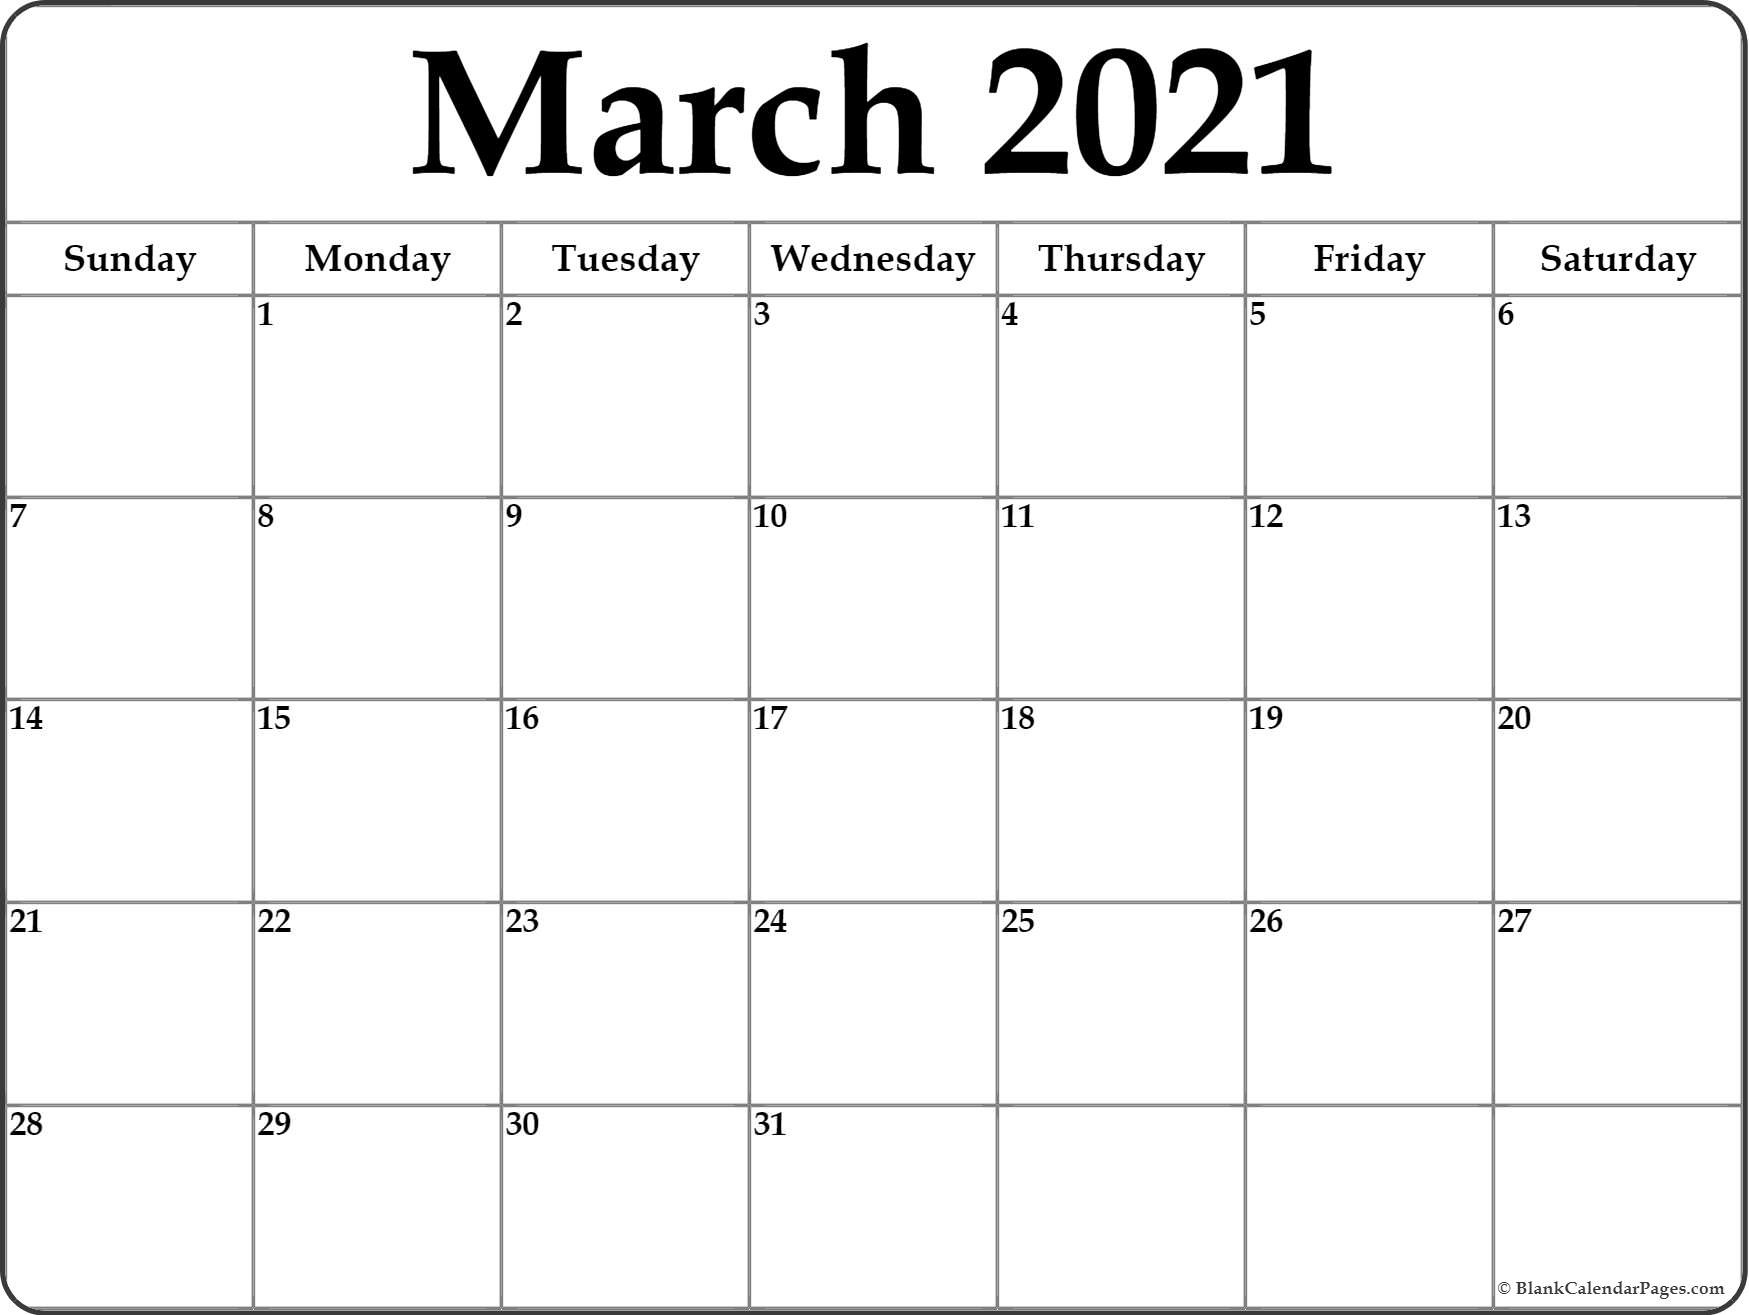 March 2021 Calendar | Free Printable Monthly Calendars-Blank March Calendar 2021 Printable